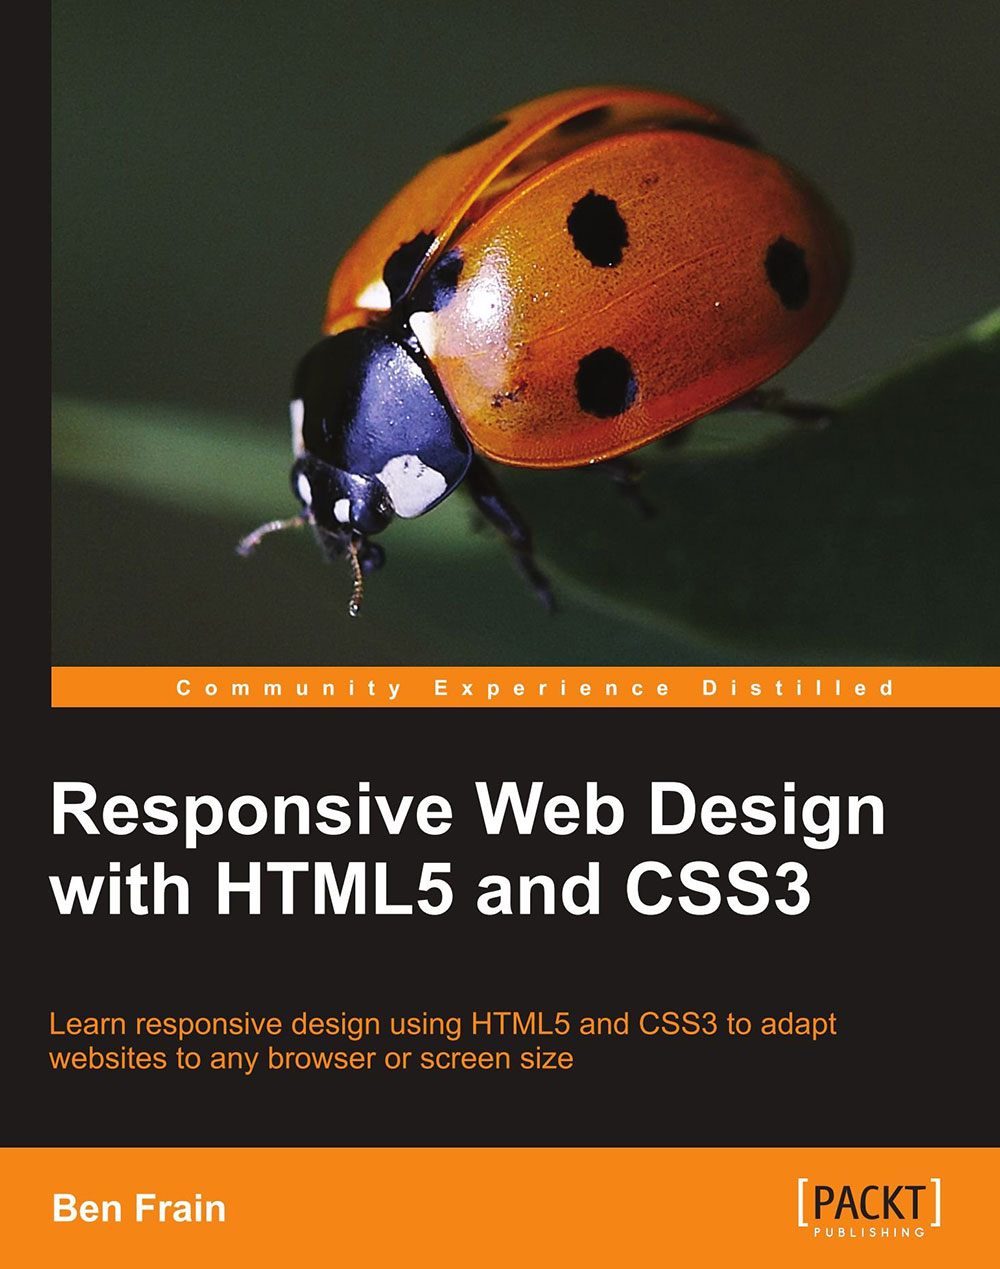 HTML5 For Web Designers, A Book Apart